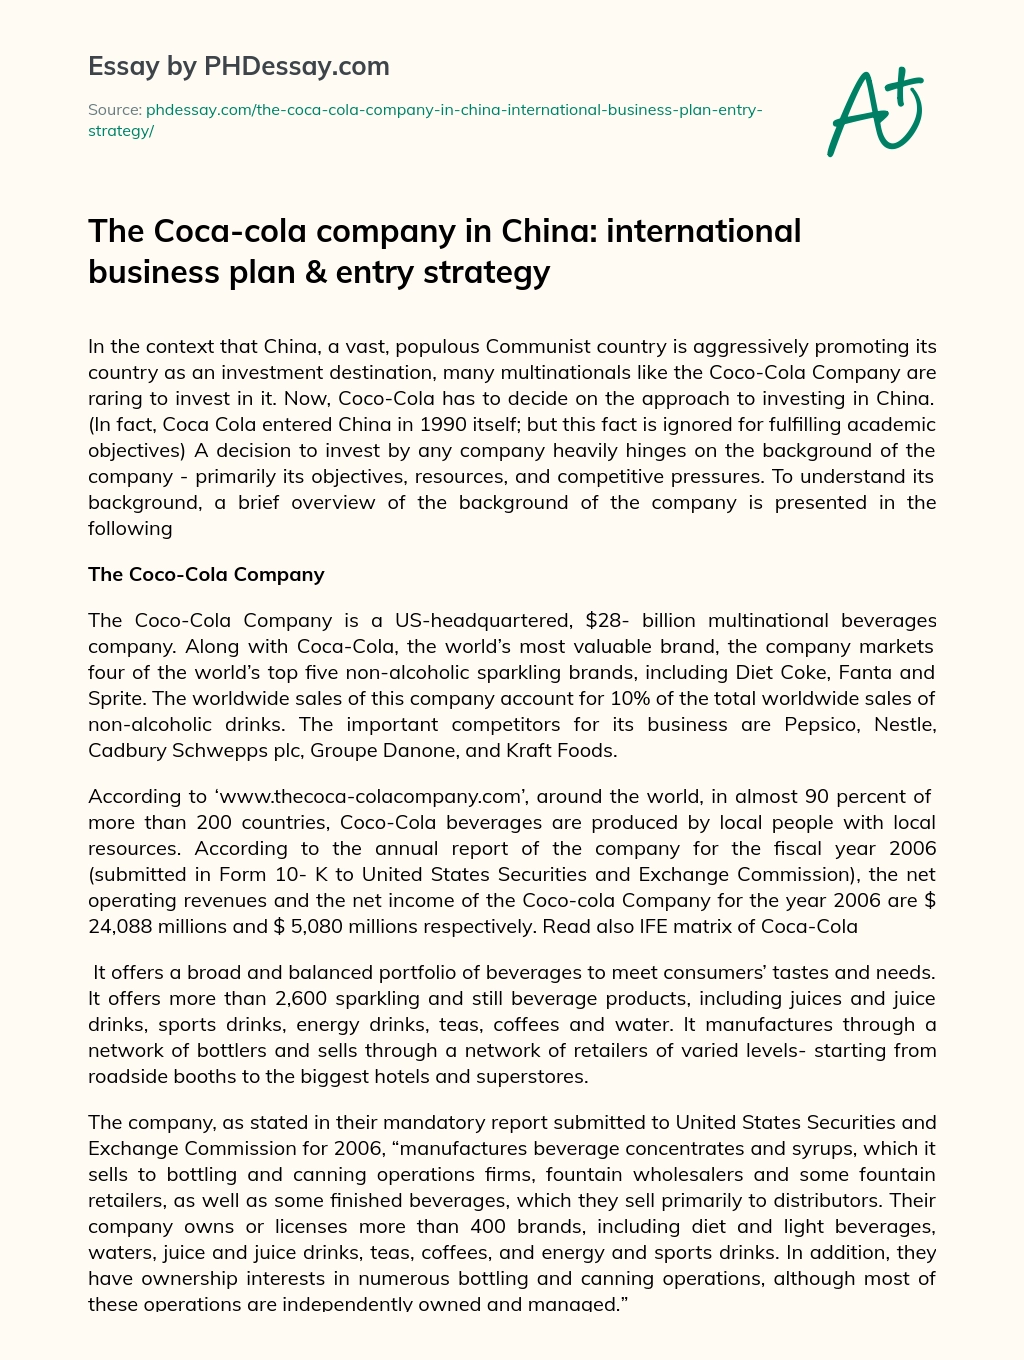 The Coca-cola company in China: international business plan & entry strategy essay